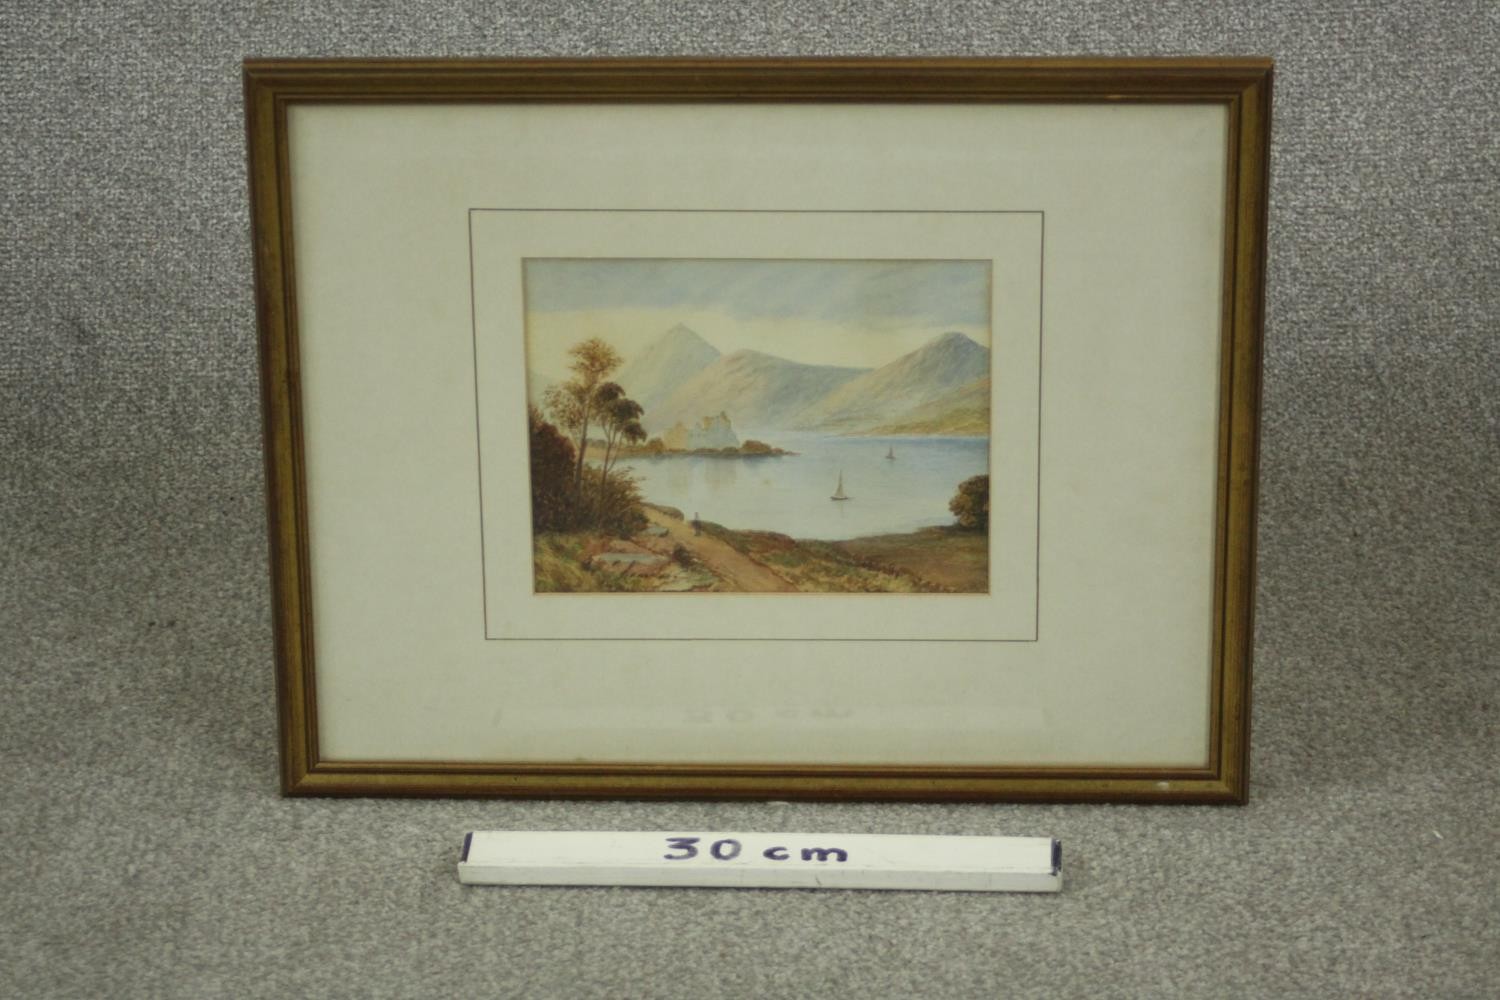 A framed and glazed 19th century watercolour of a lake scene with mountains in the distance, - Image 3 of 7